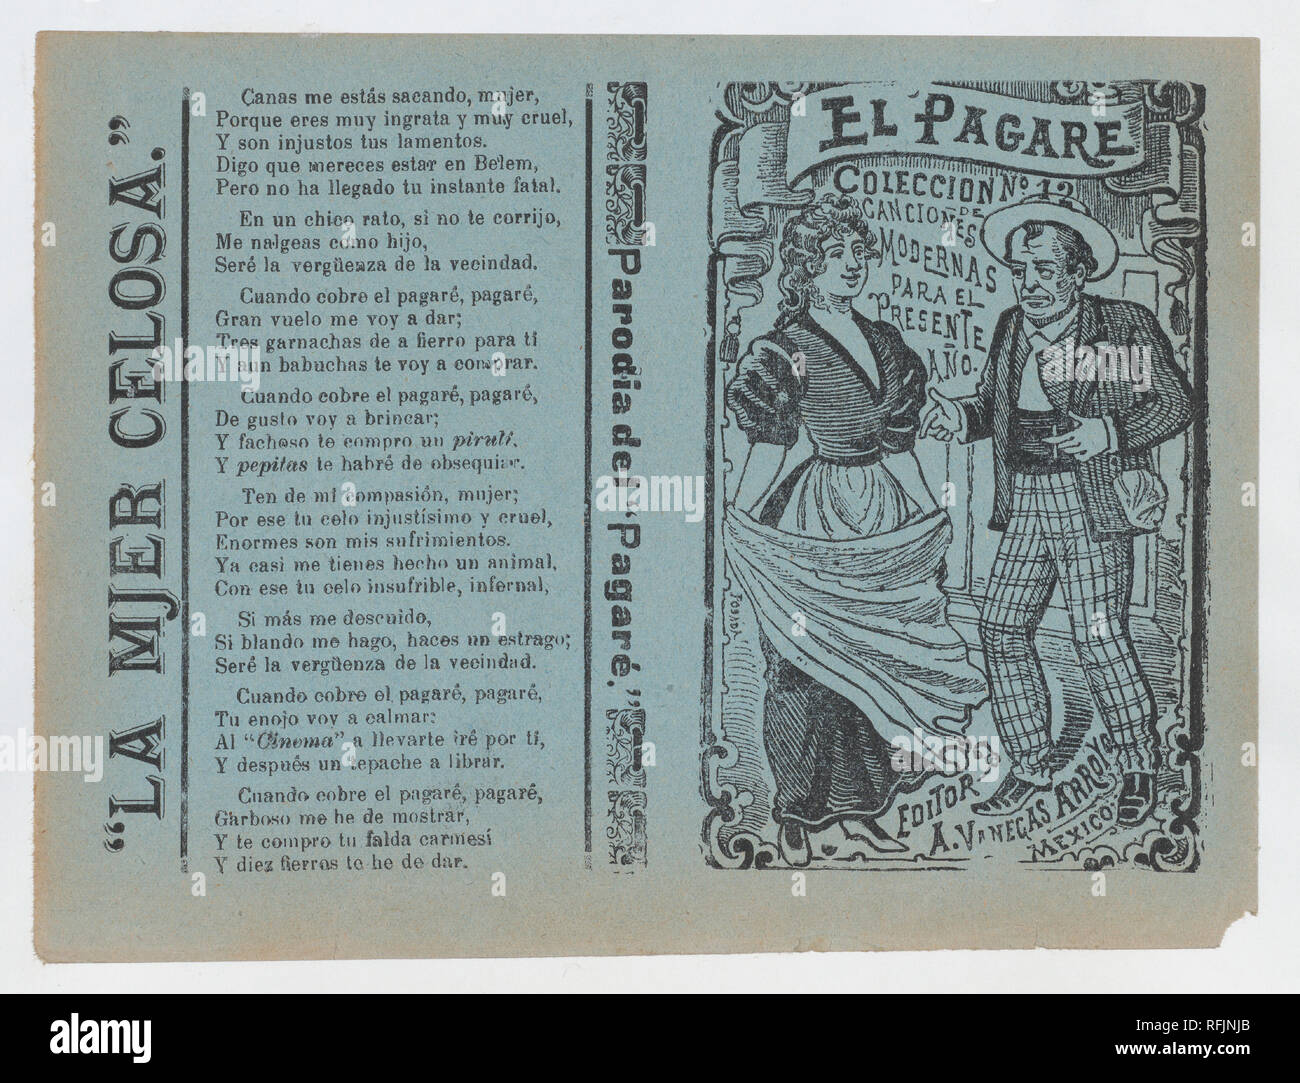 Cover for 'El Pagare', a man holding a cigarette and gesturing to a woman holding a shawl. Artist: José Guadalupe Posada (Mexican, 1851-1913). Dimensions: Sheet: 5 13/16 × 7 7/8 in. (14.8 × 20 cm). Publisher: Antonio Vanegas Arroyo (1850-1917, Mexican). Date: ca. 1890-1910. Museum: Metropolitan Museum of Art, New York, USA. Stock Photo